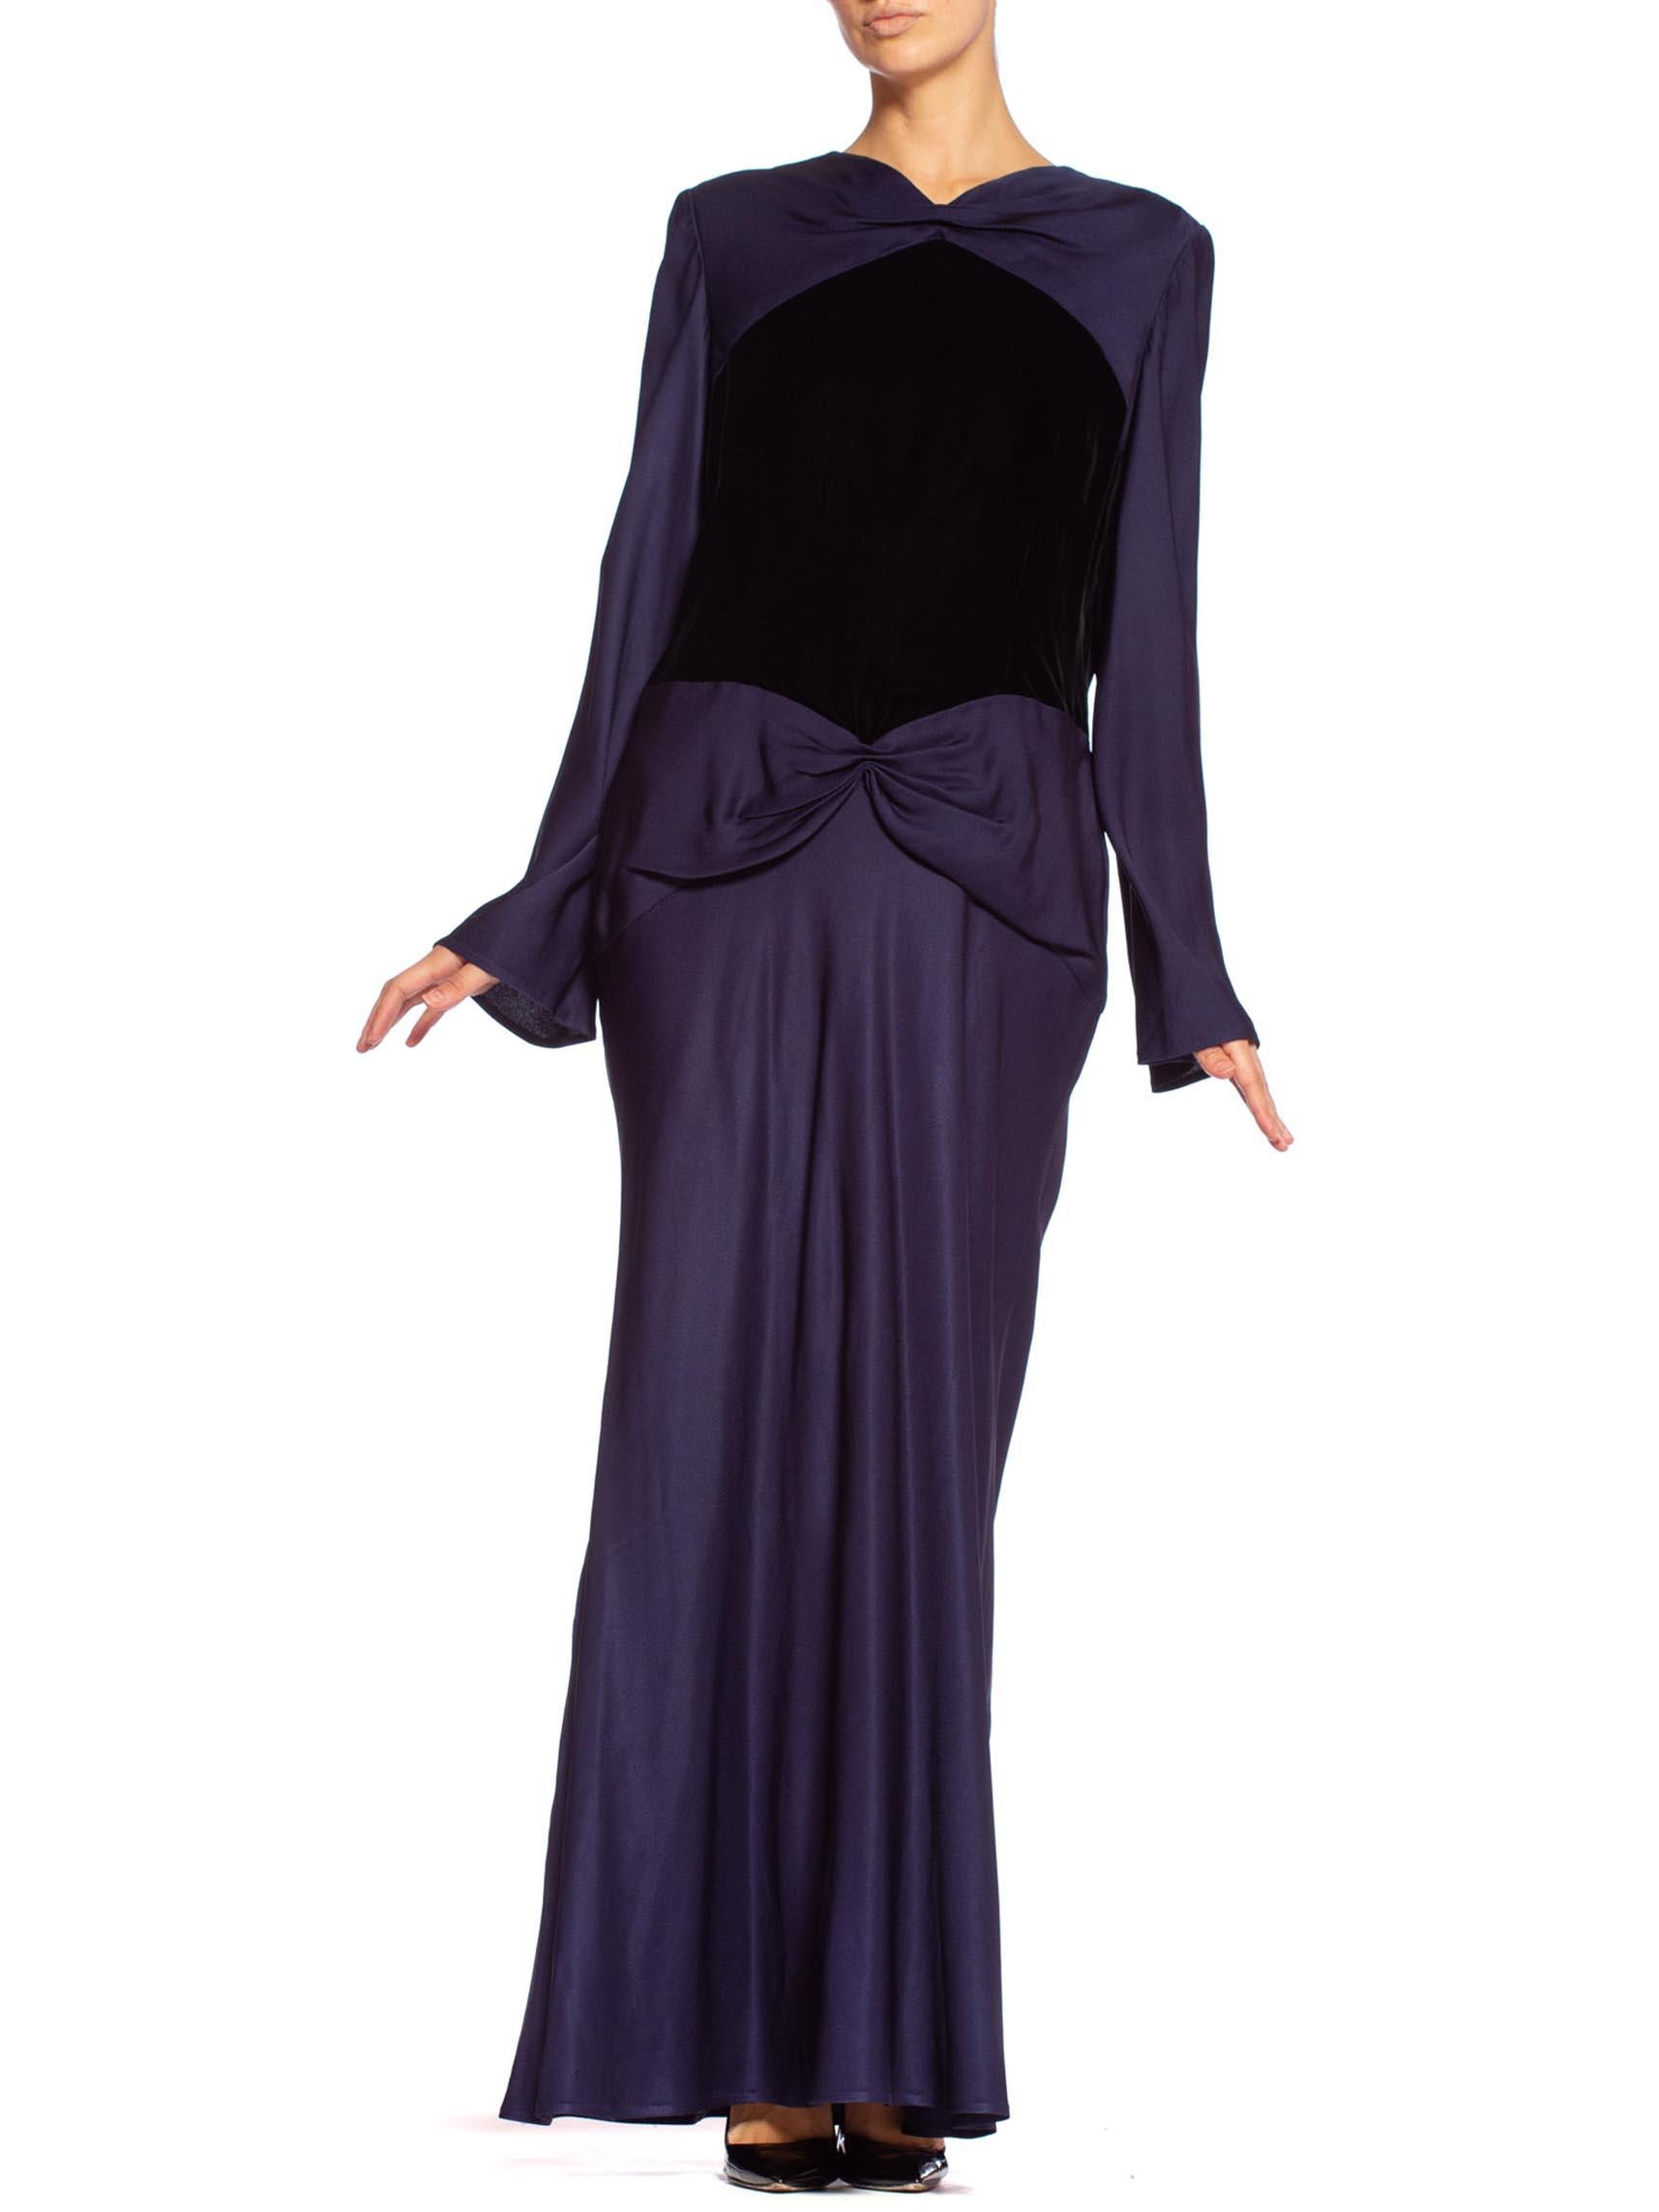 Women's 1980'S BILL BLASS Navy Blue Haute Couture Silk Crepe Back Satin Sleeved Gown Wi